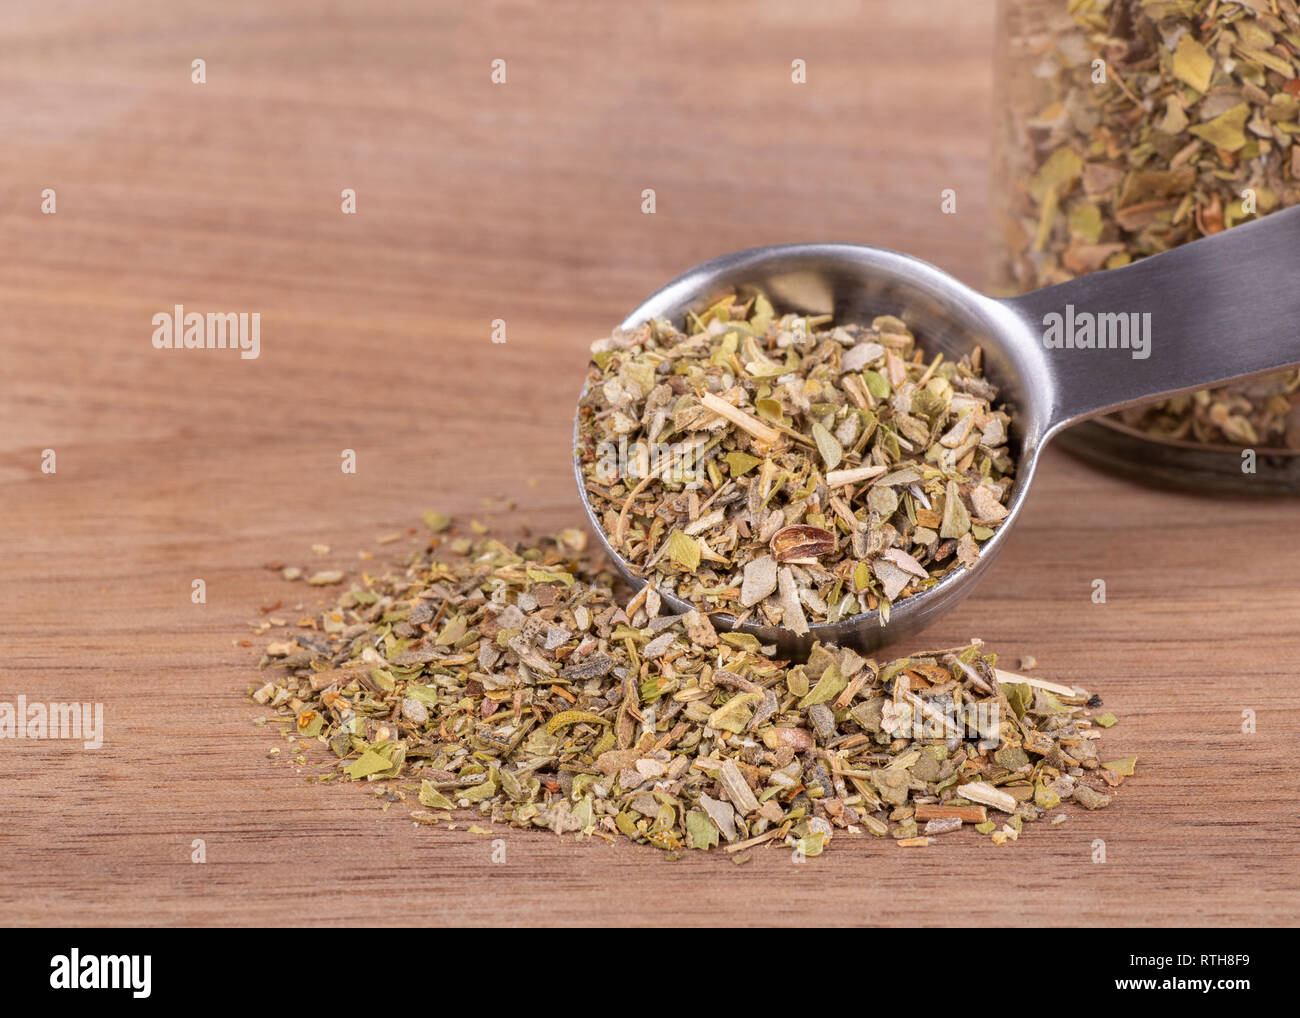 Closeup of a measuring spoon of chopped oregan spilled onto a wooden surface and a jar of herbs in background with copy space Stock Photo